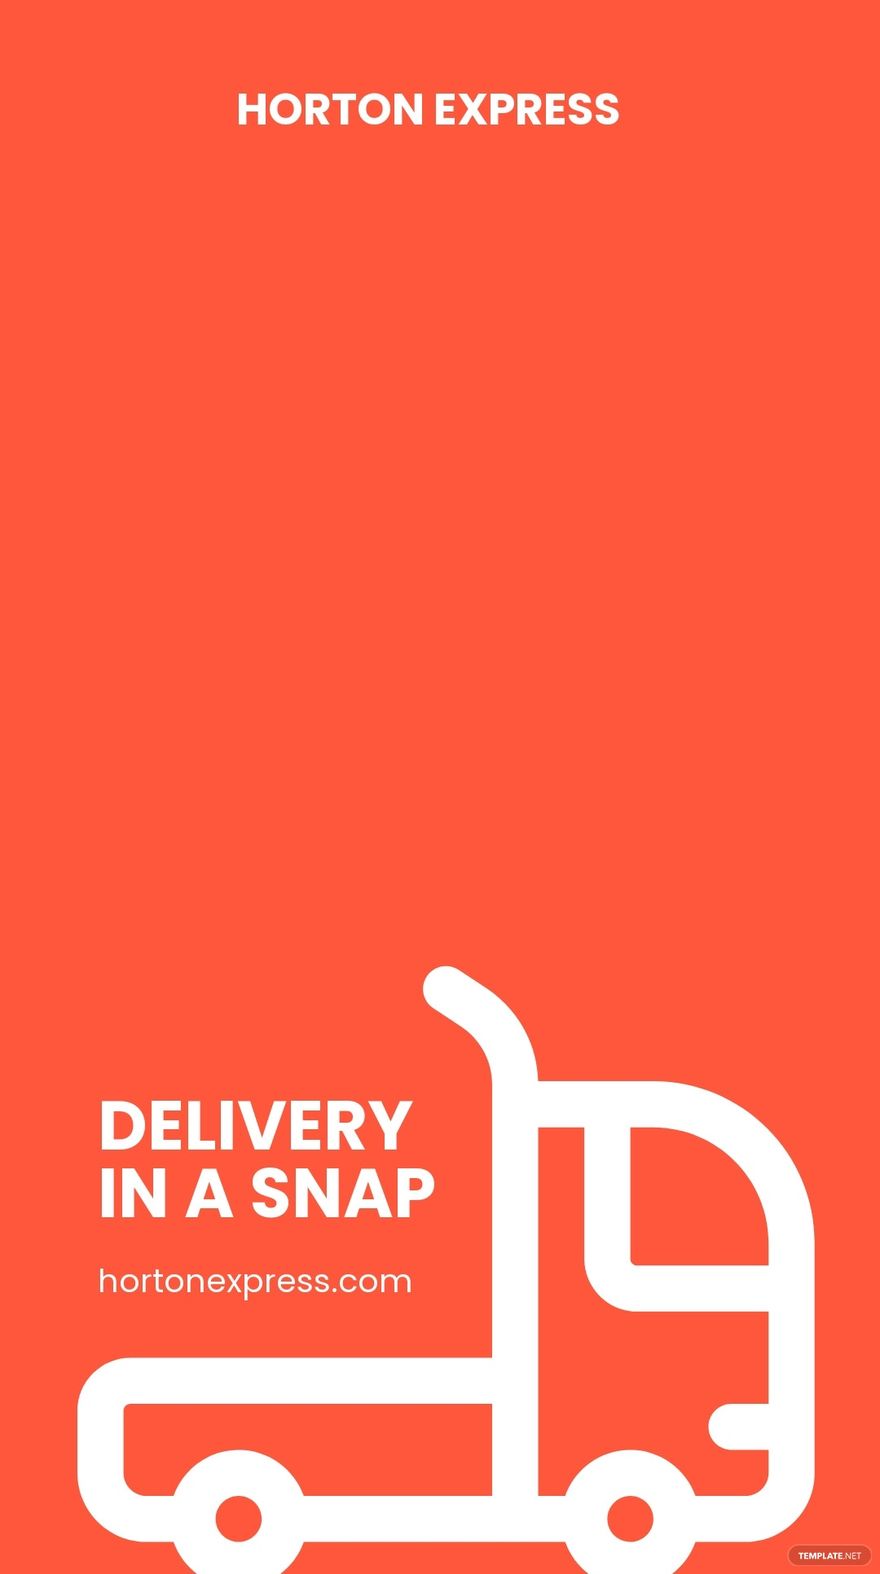 Free Delivery Service Snapchat Geofilter Template